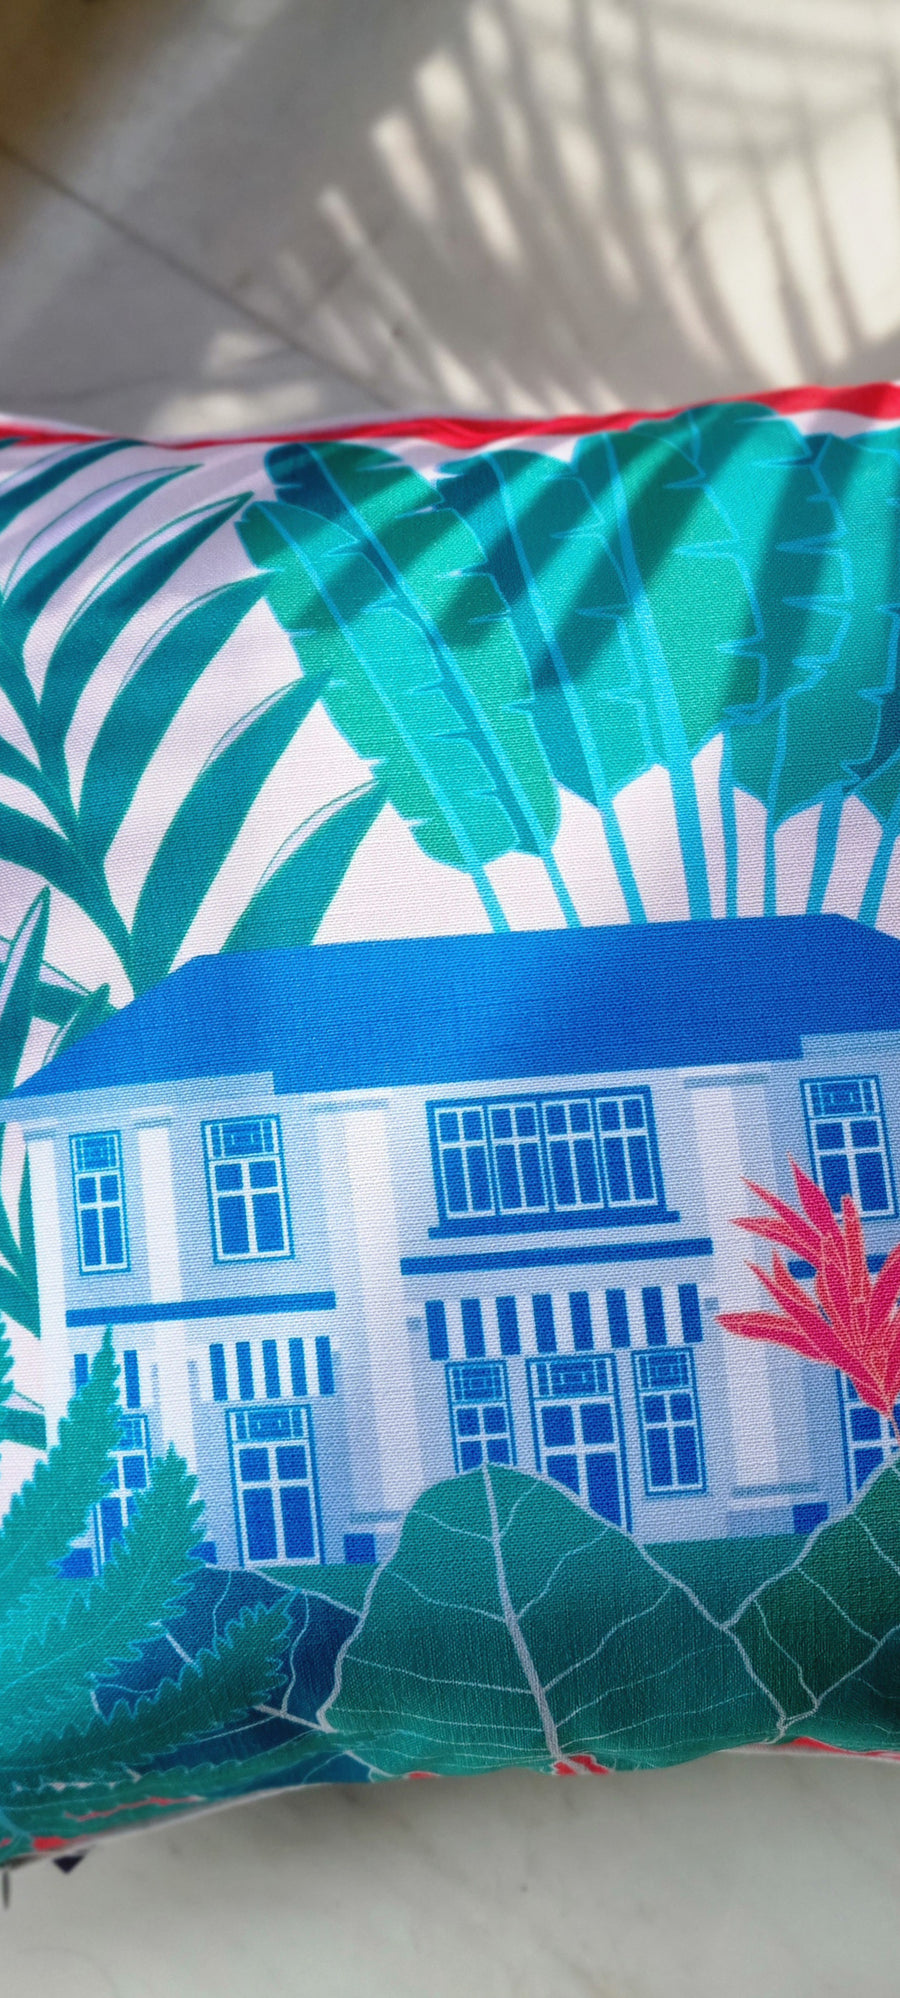 Tropical Bungalow Cushion Cover